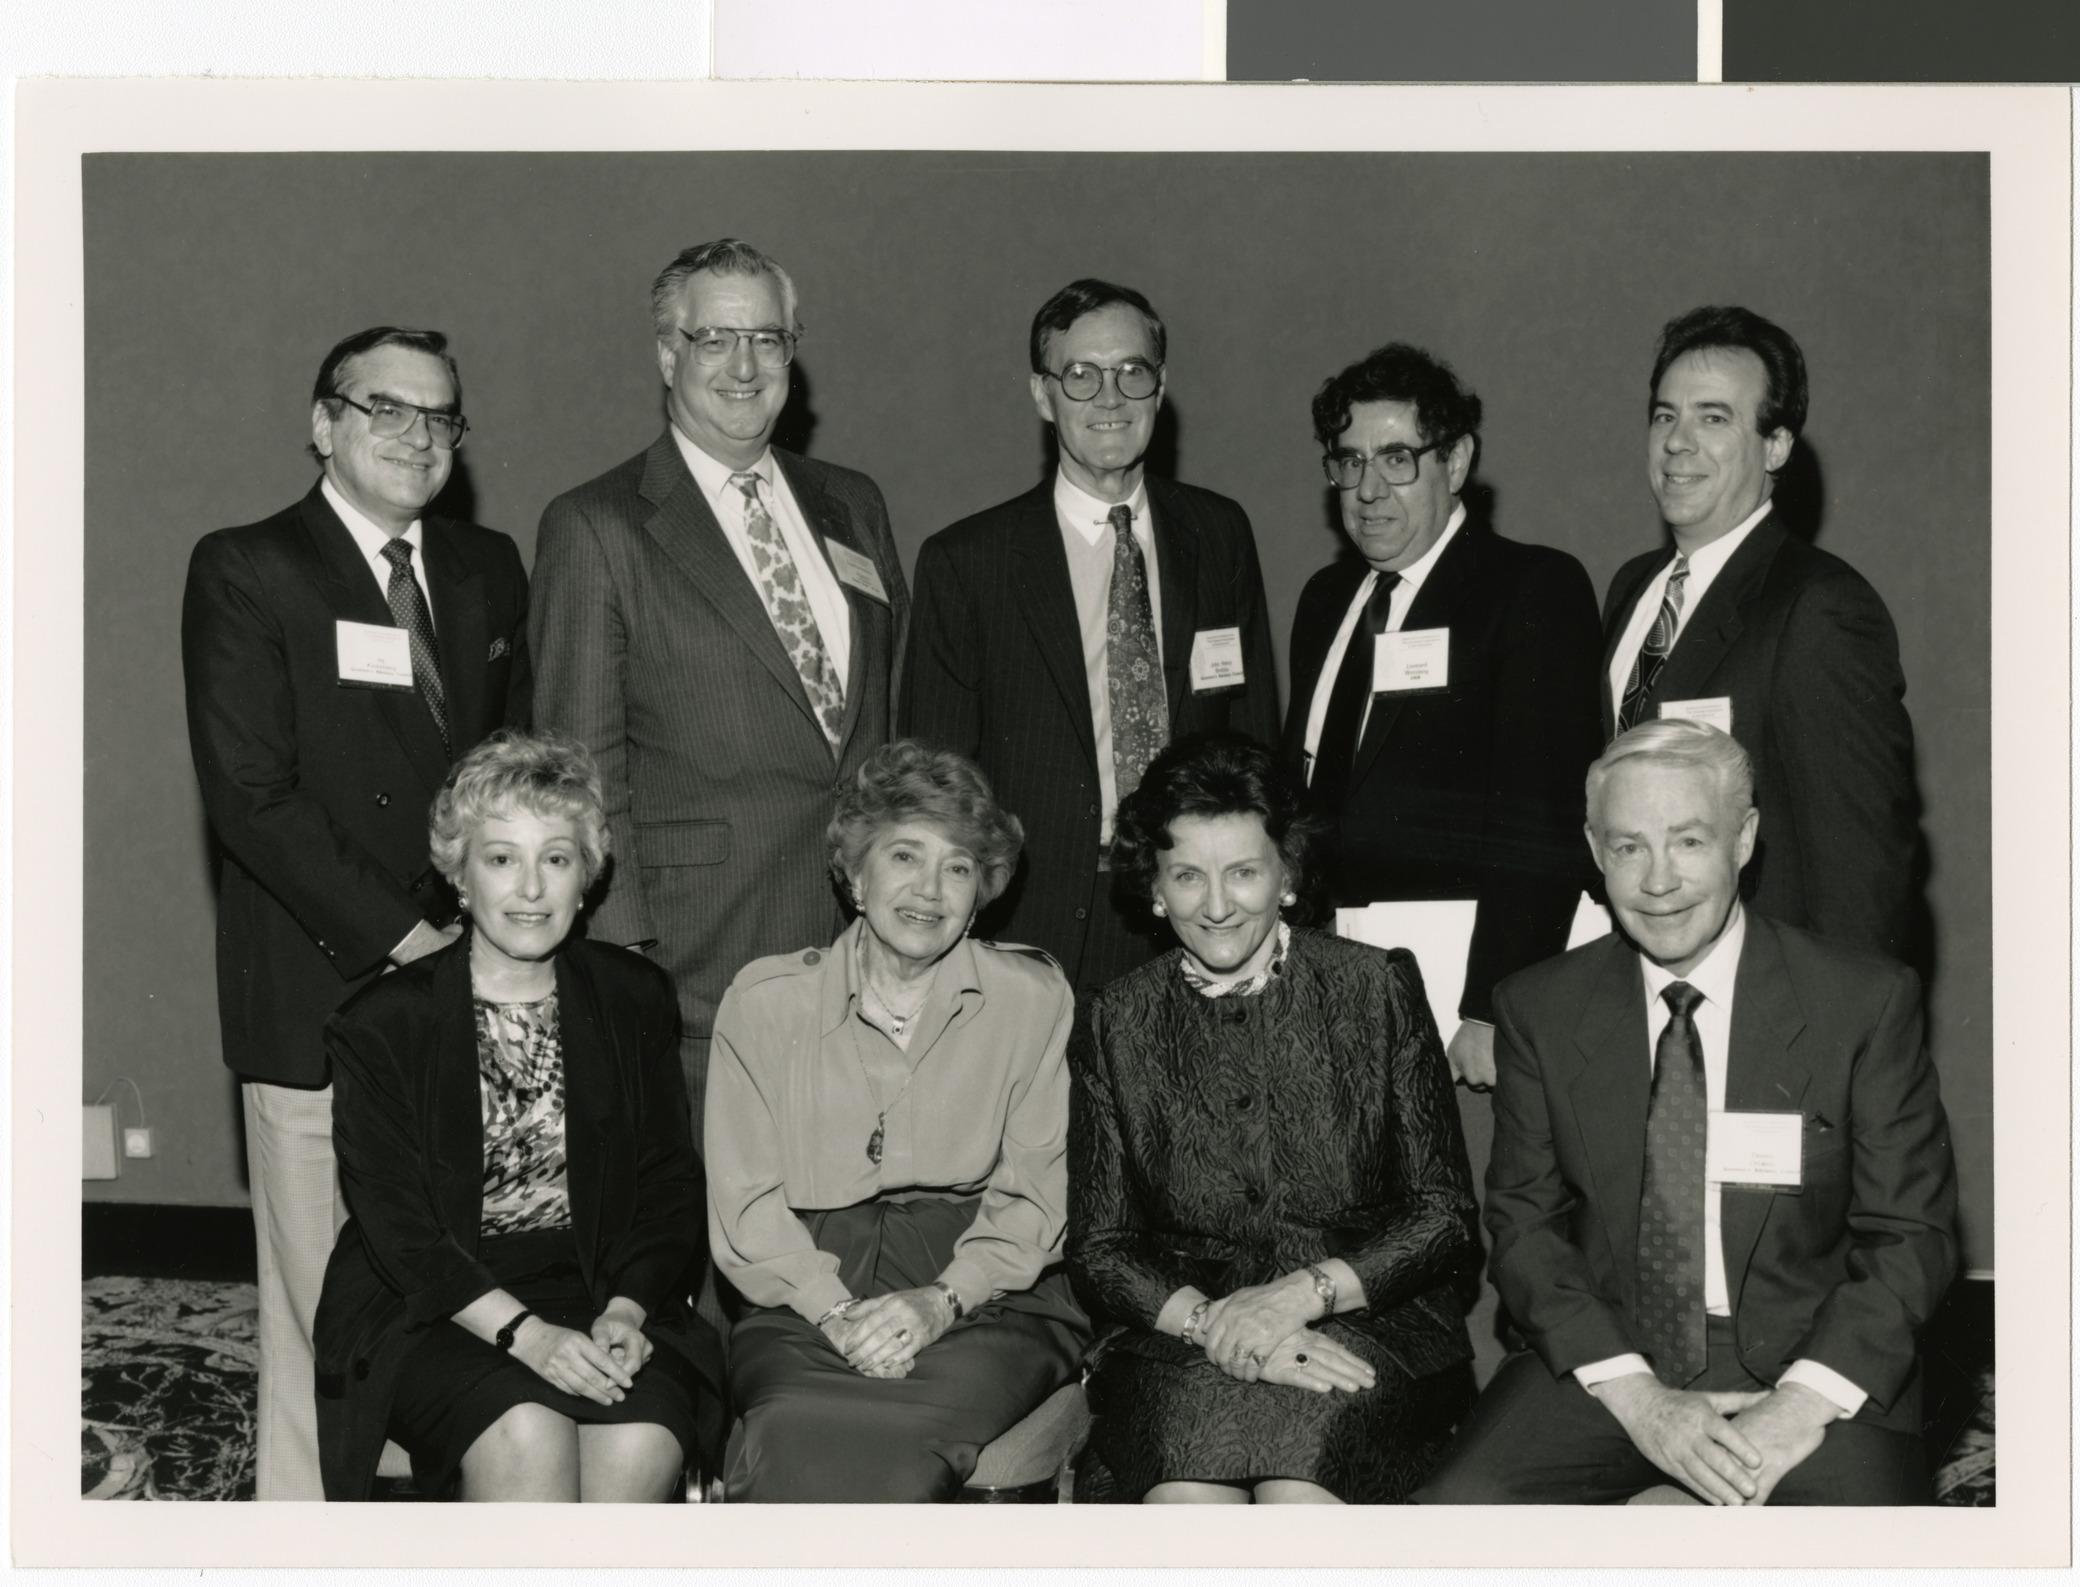 Photographs of the Governor's Conference on "The Universal Implications of the Holocaust," image 03